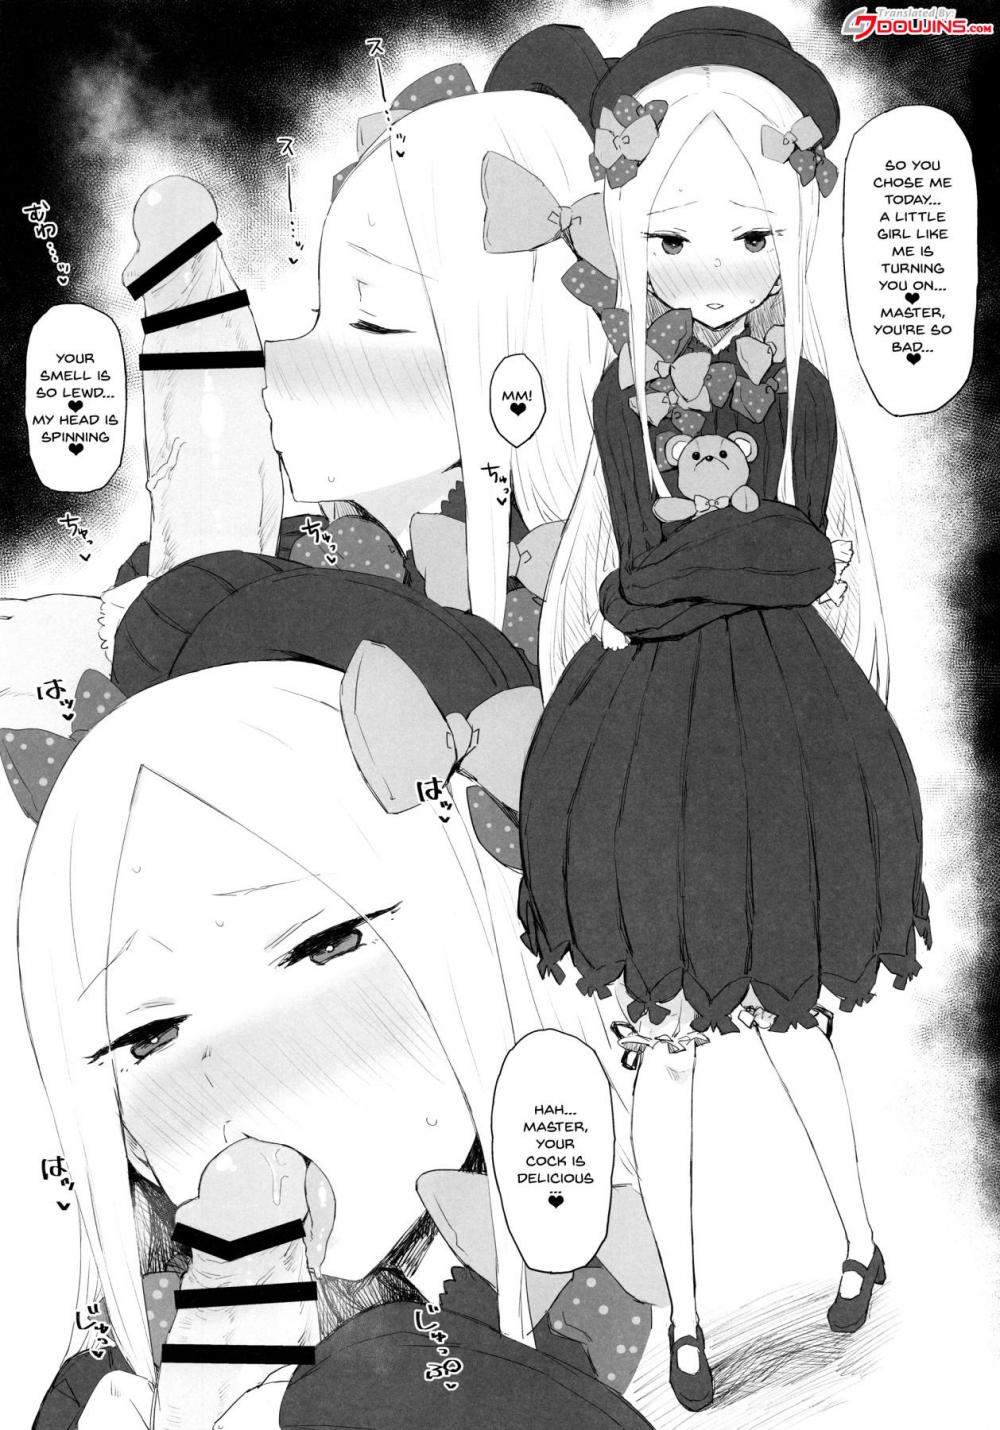 Hentai Manga Comic-A Story About Getting Lewd With My Favorite Servant-Read-2